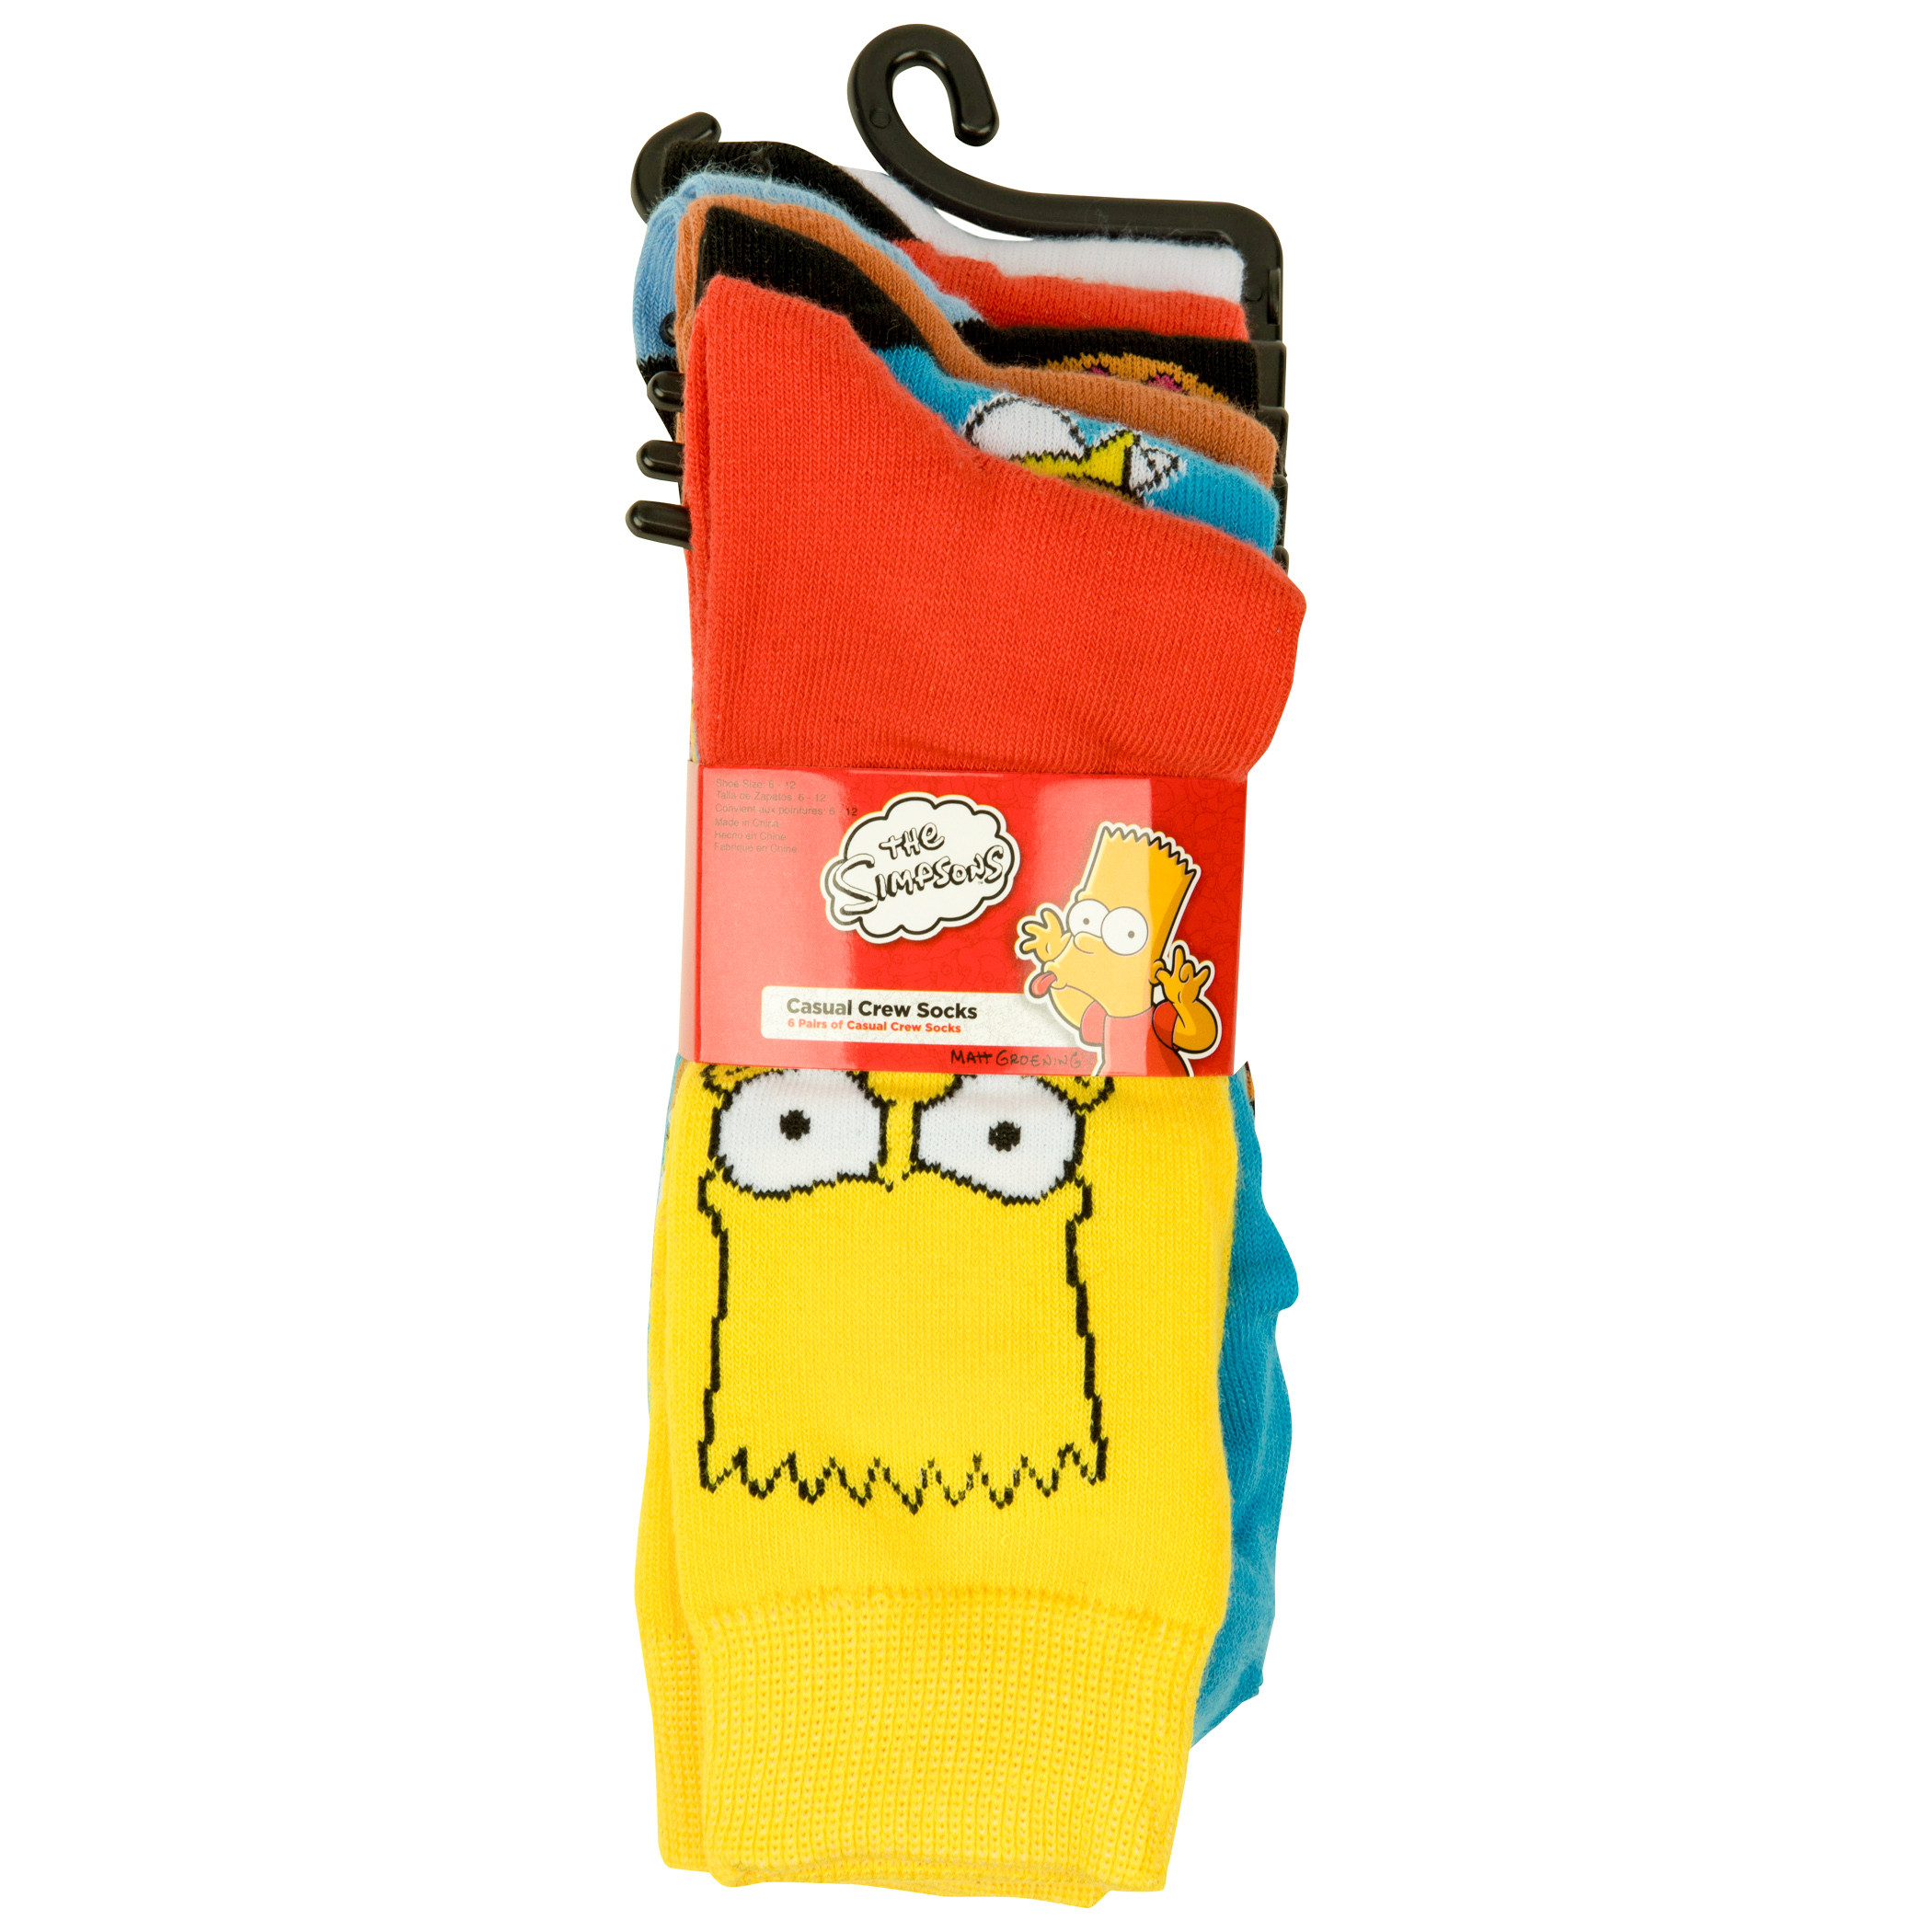 The Simpsons Assorted Characters Men's 6-Pair Pack of Crew Socks